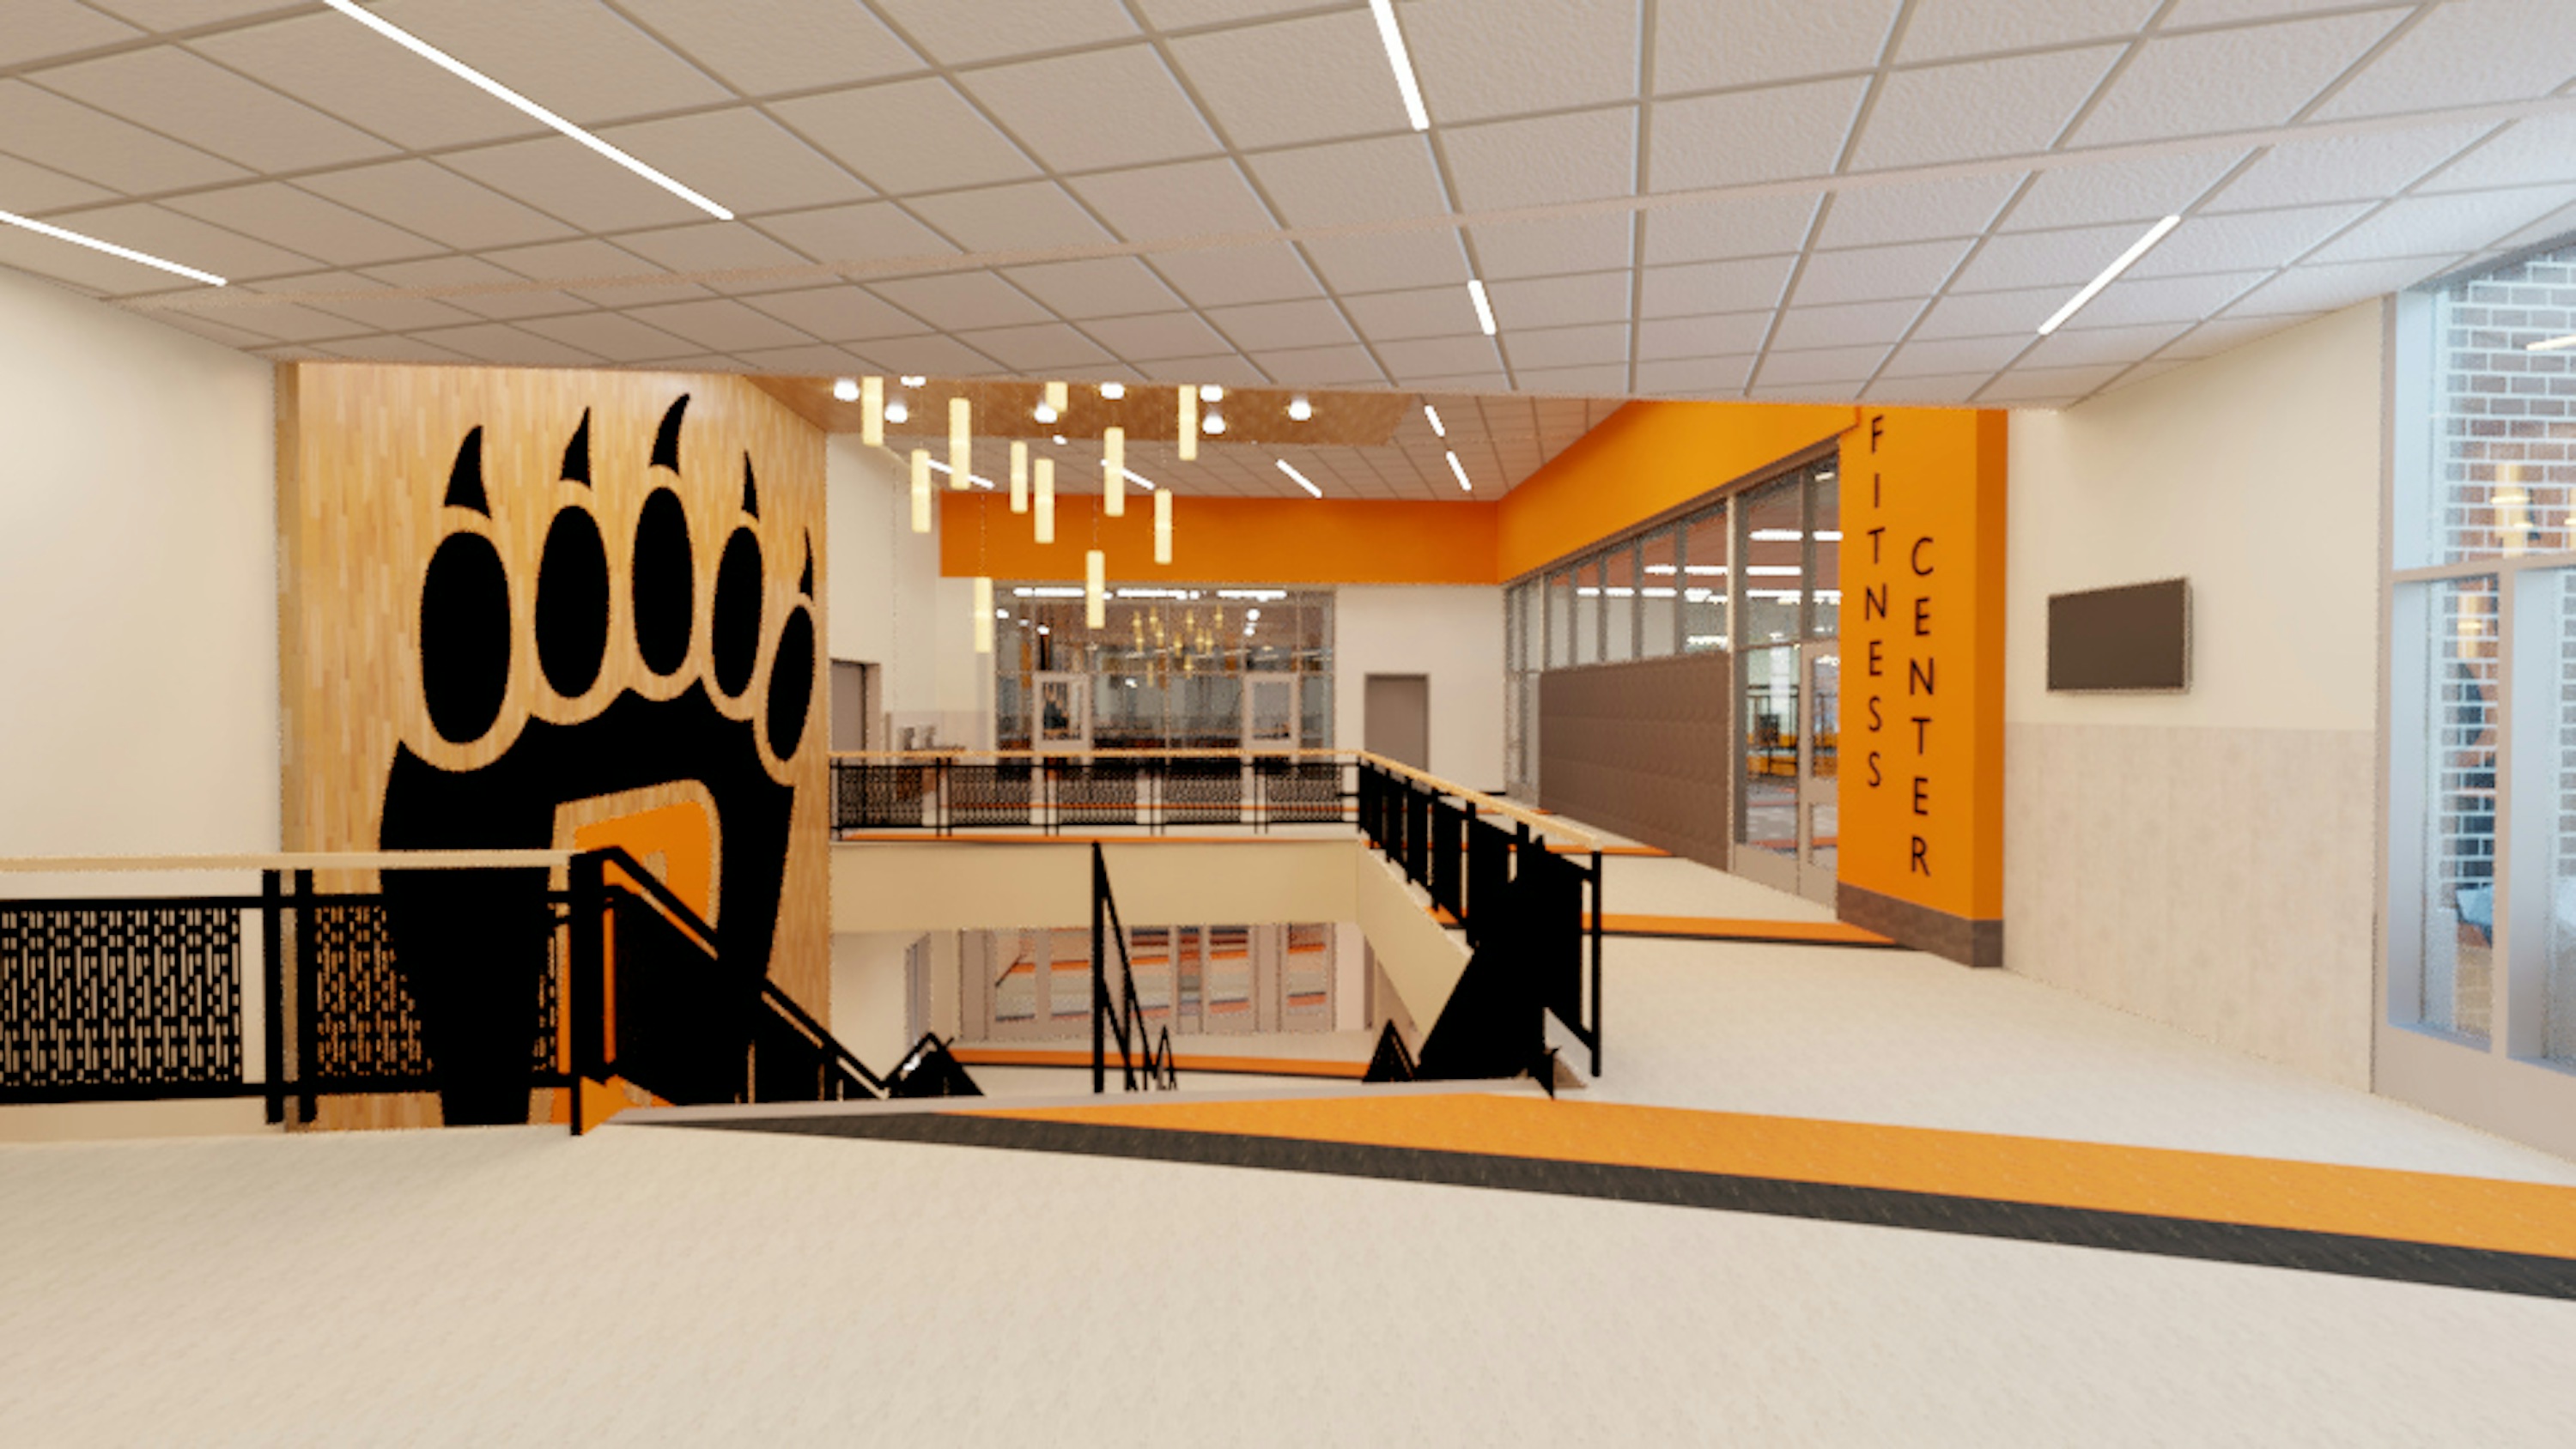 FINAL ATHLETICS LOBBY VIEW TO FIELDHOUSE